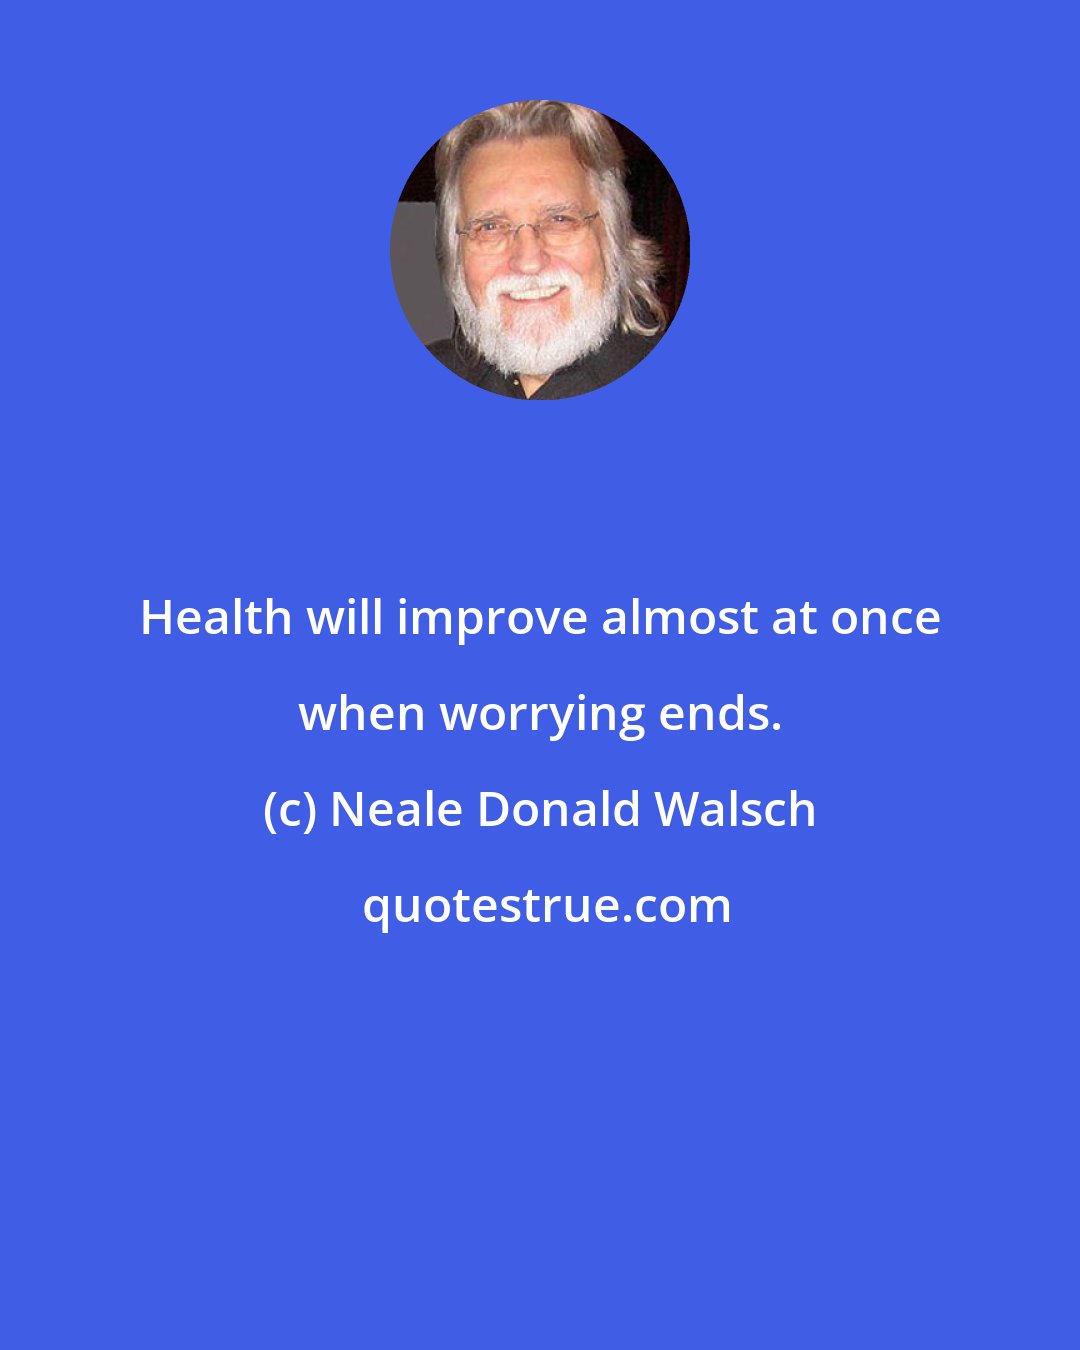 Neale Donald Walsch: Health will improve almost at once when worrying ends.